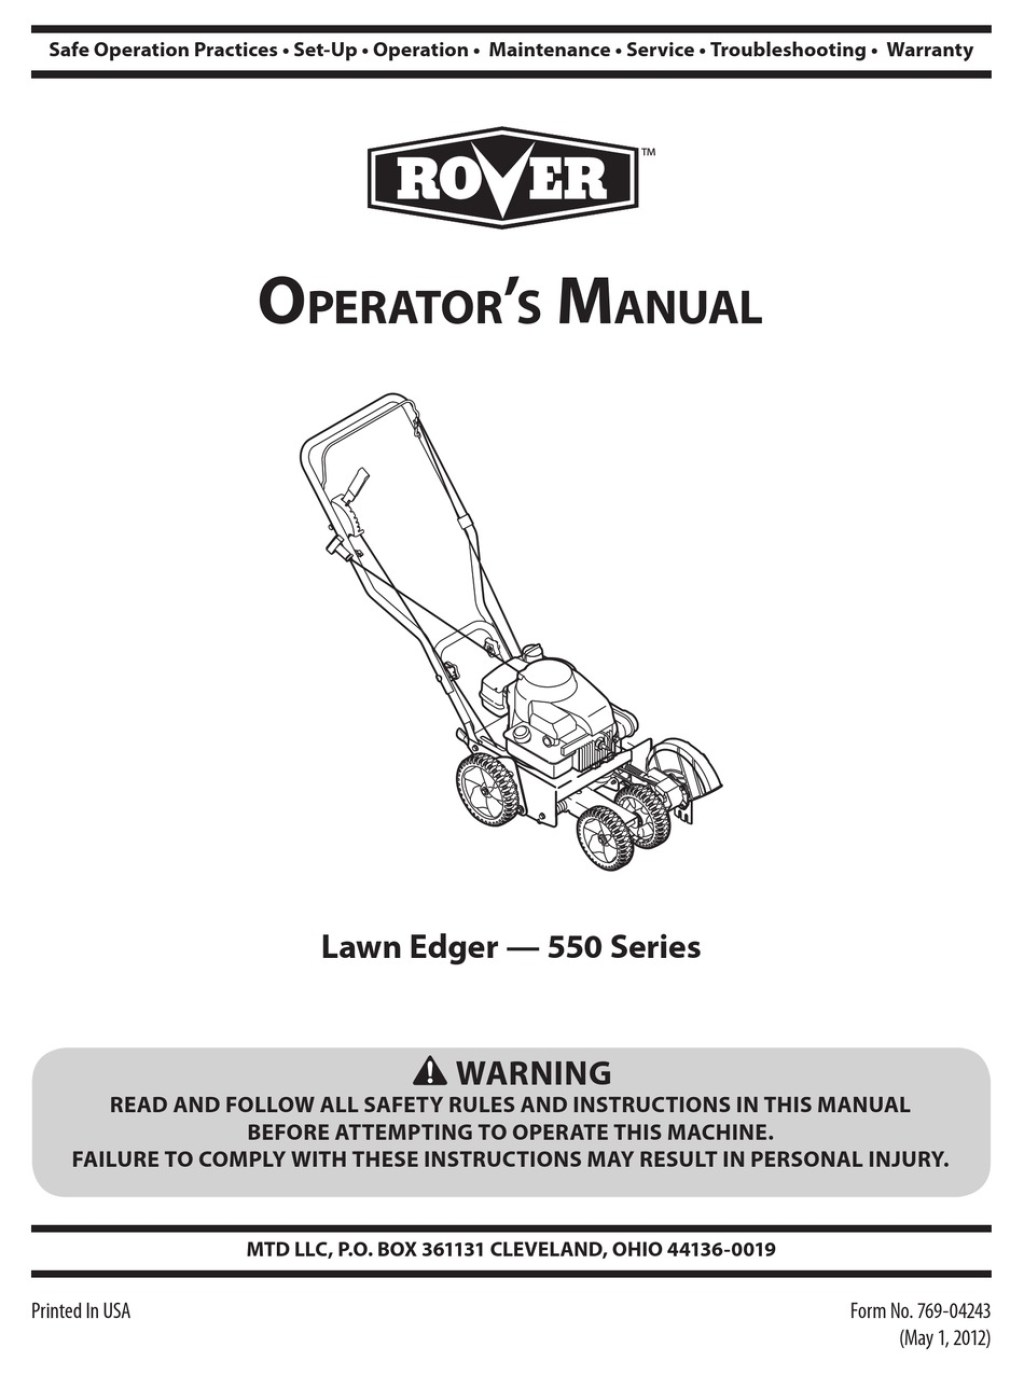 Picture of: ROVER  SERIES OPERATOR’S MANUAL Pdf Download  ManualsLib